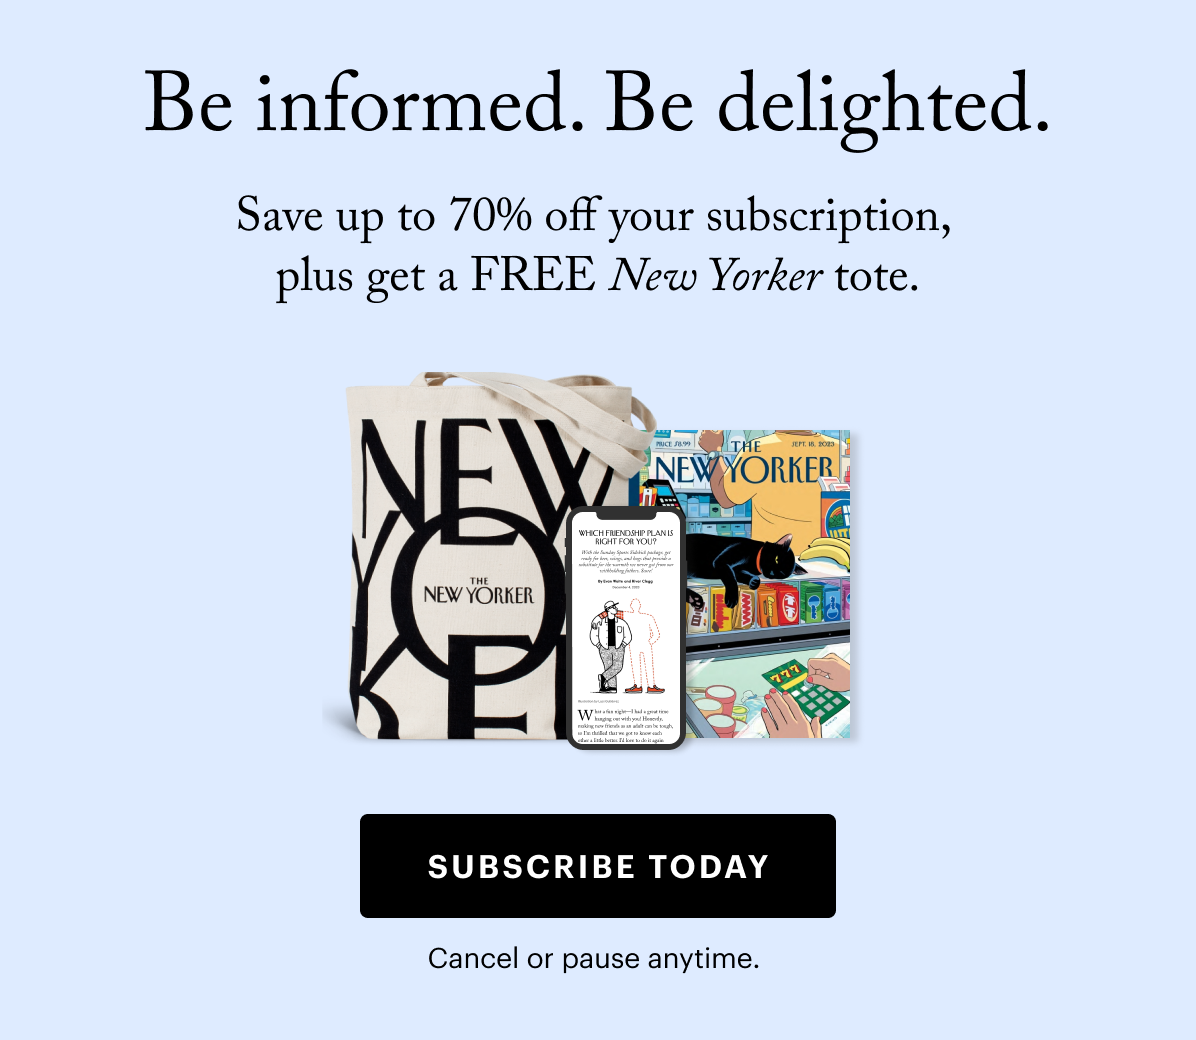 New Year's Sale. Save up to 70% off your subscription, plus get a FREE New Yorker tote. Subscribe Today. Cancel or pause anytime.